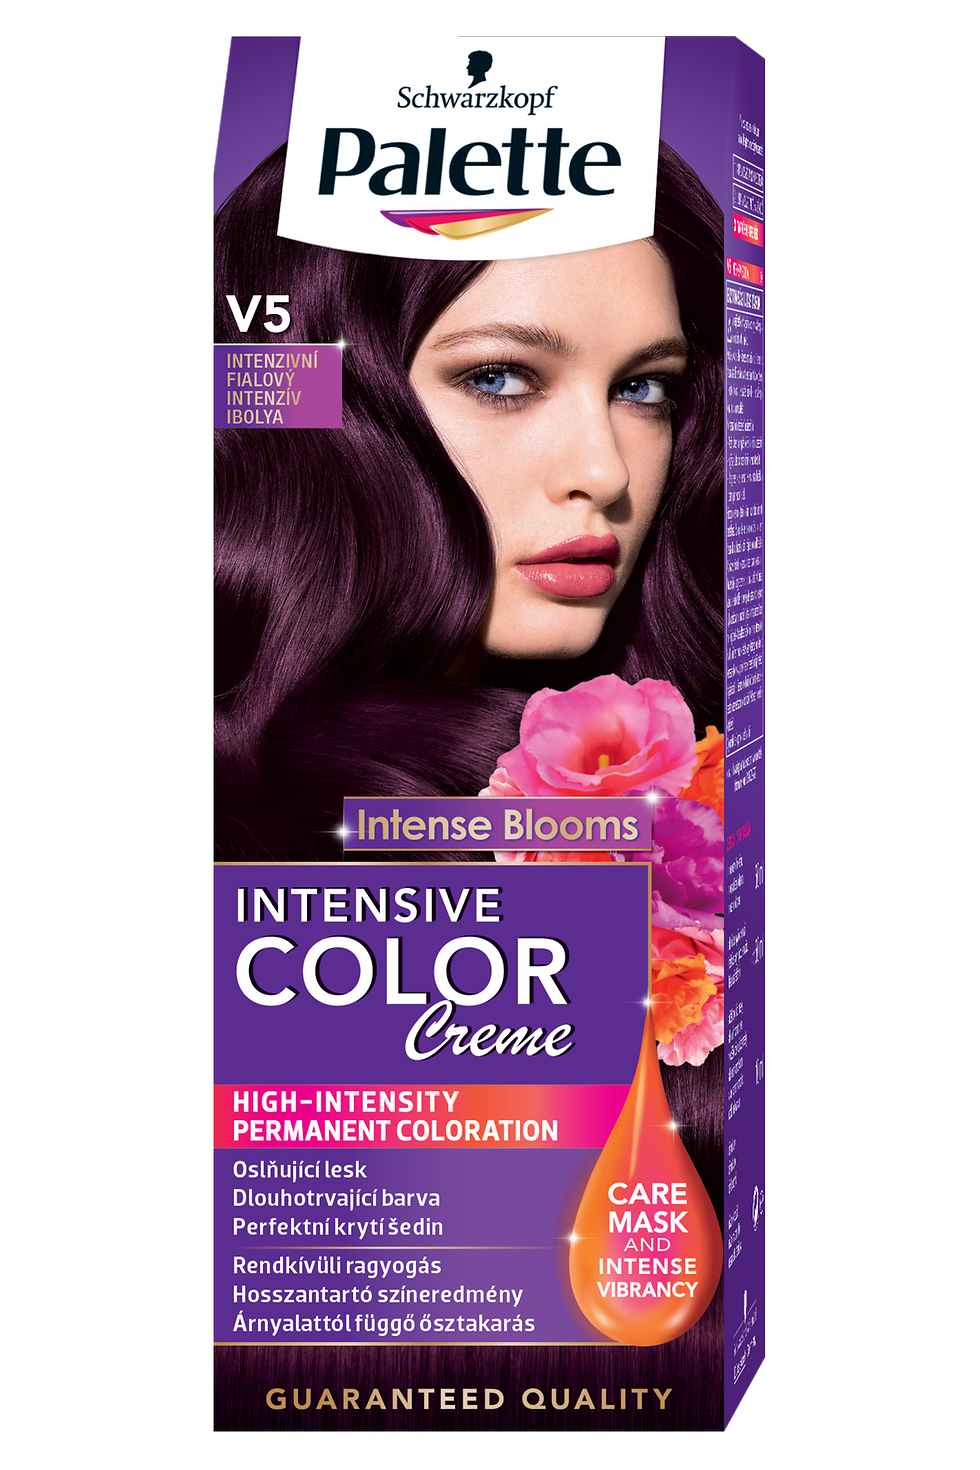 Palette Intensive Color Cream Brouge a Intense Blooms